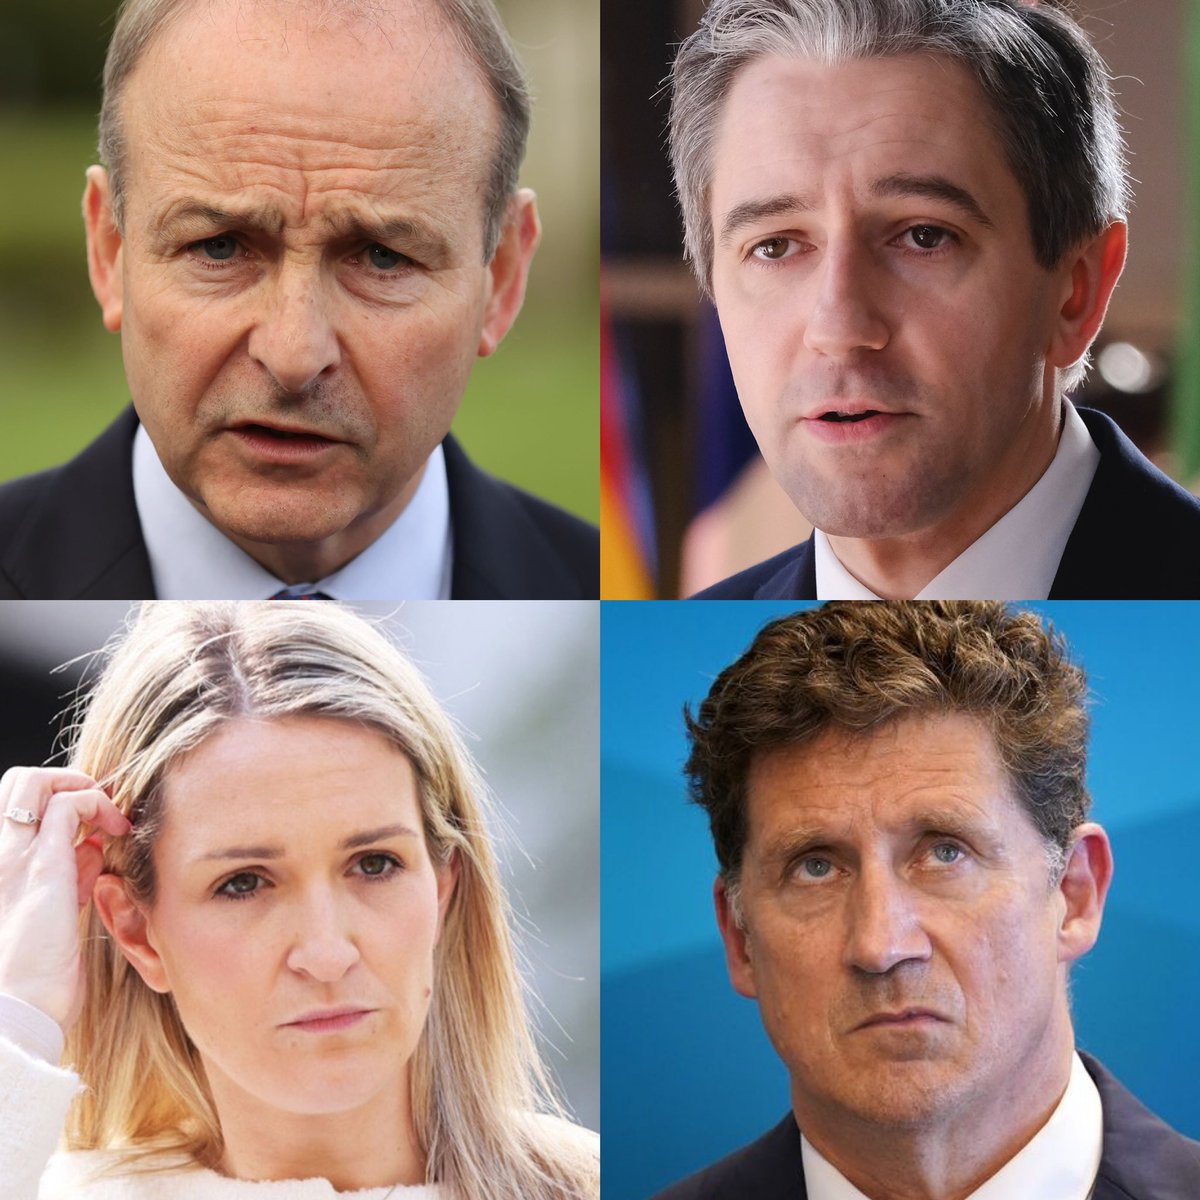 These traitors want to opt us into the #EUmigrationPact when 75% of Ireland said end reckless open borders. They raised taxes again on petrol/diesel when 75% of Ireland are motorists. And they did it all before Council/MEP & TD elections – it’s a hell of an election strategy! LOL